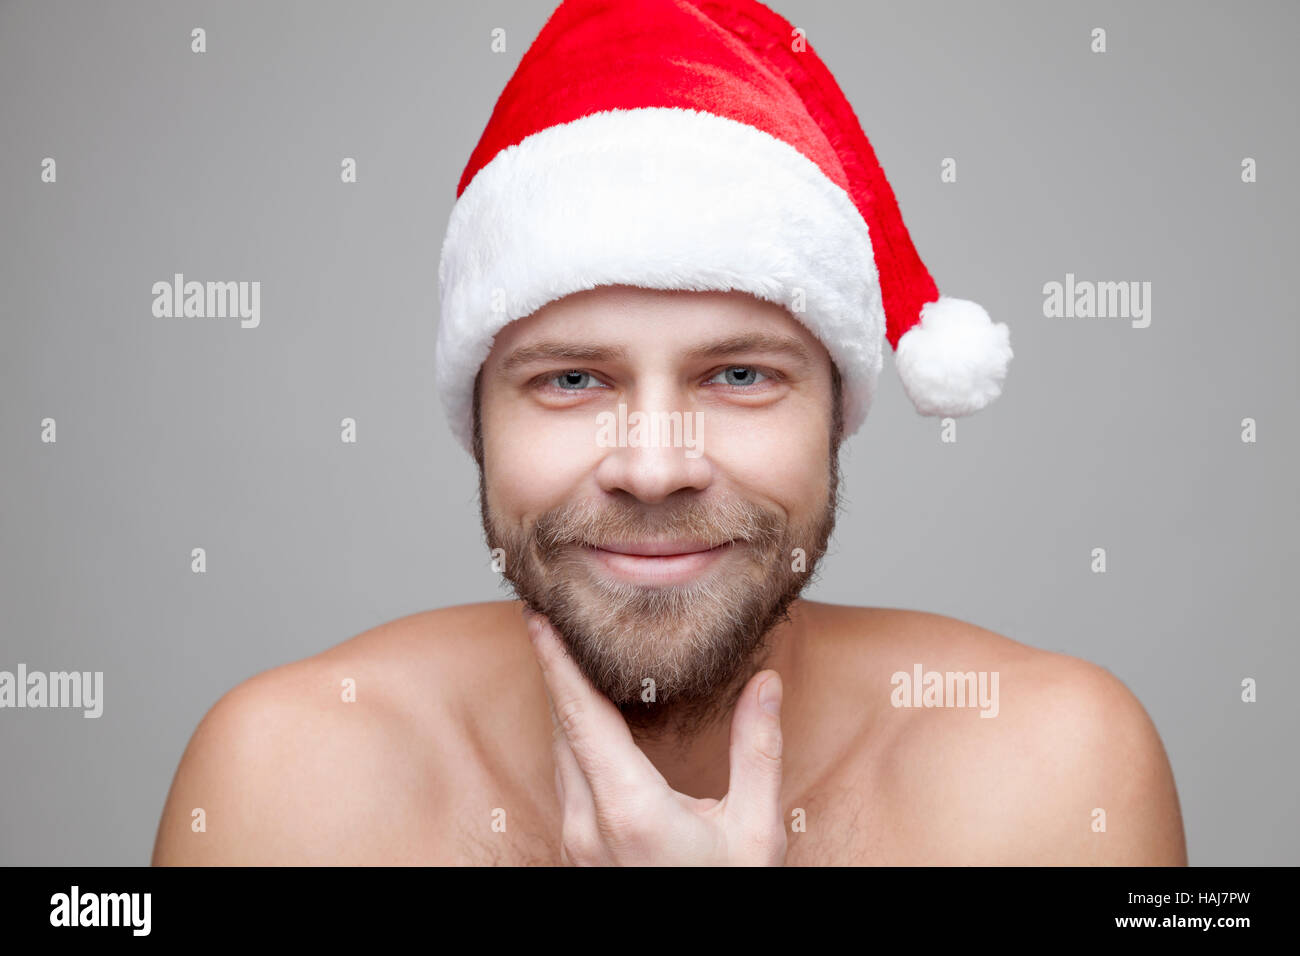 Portrait of a handsome man with beard wearing a Christmas hat Stock Photo